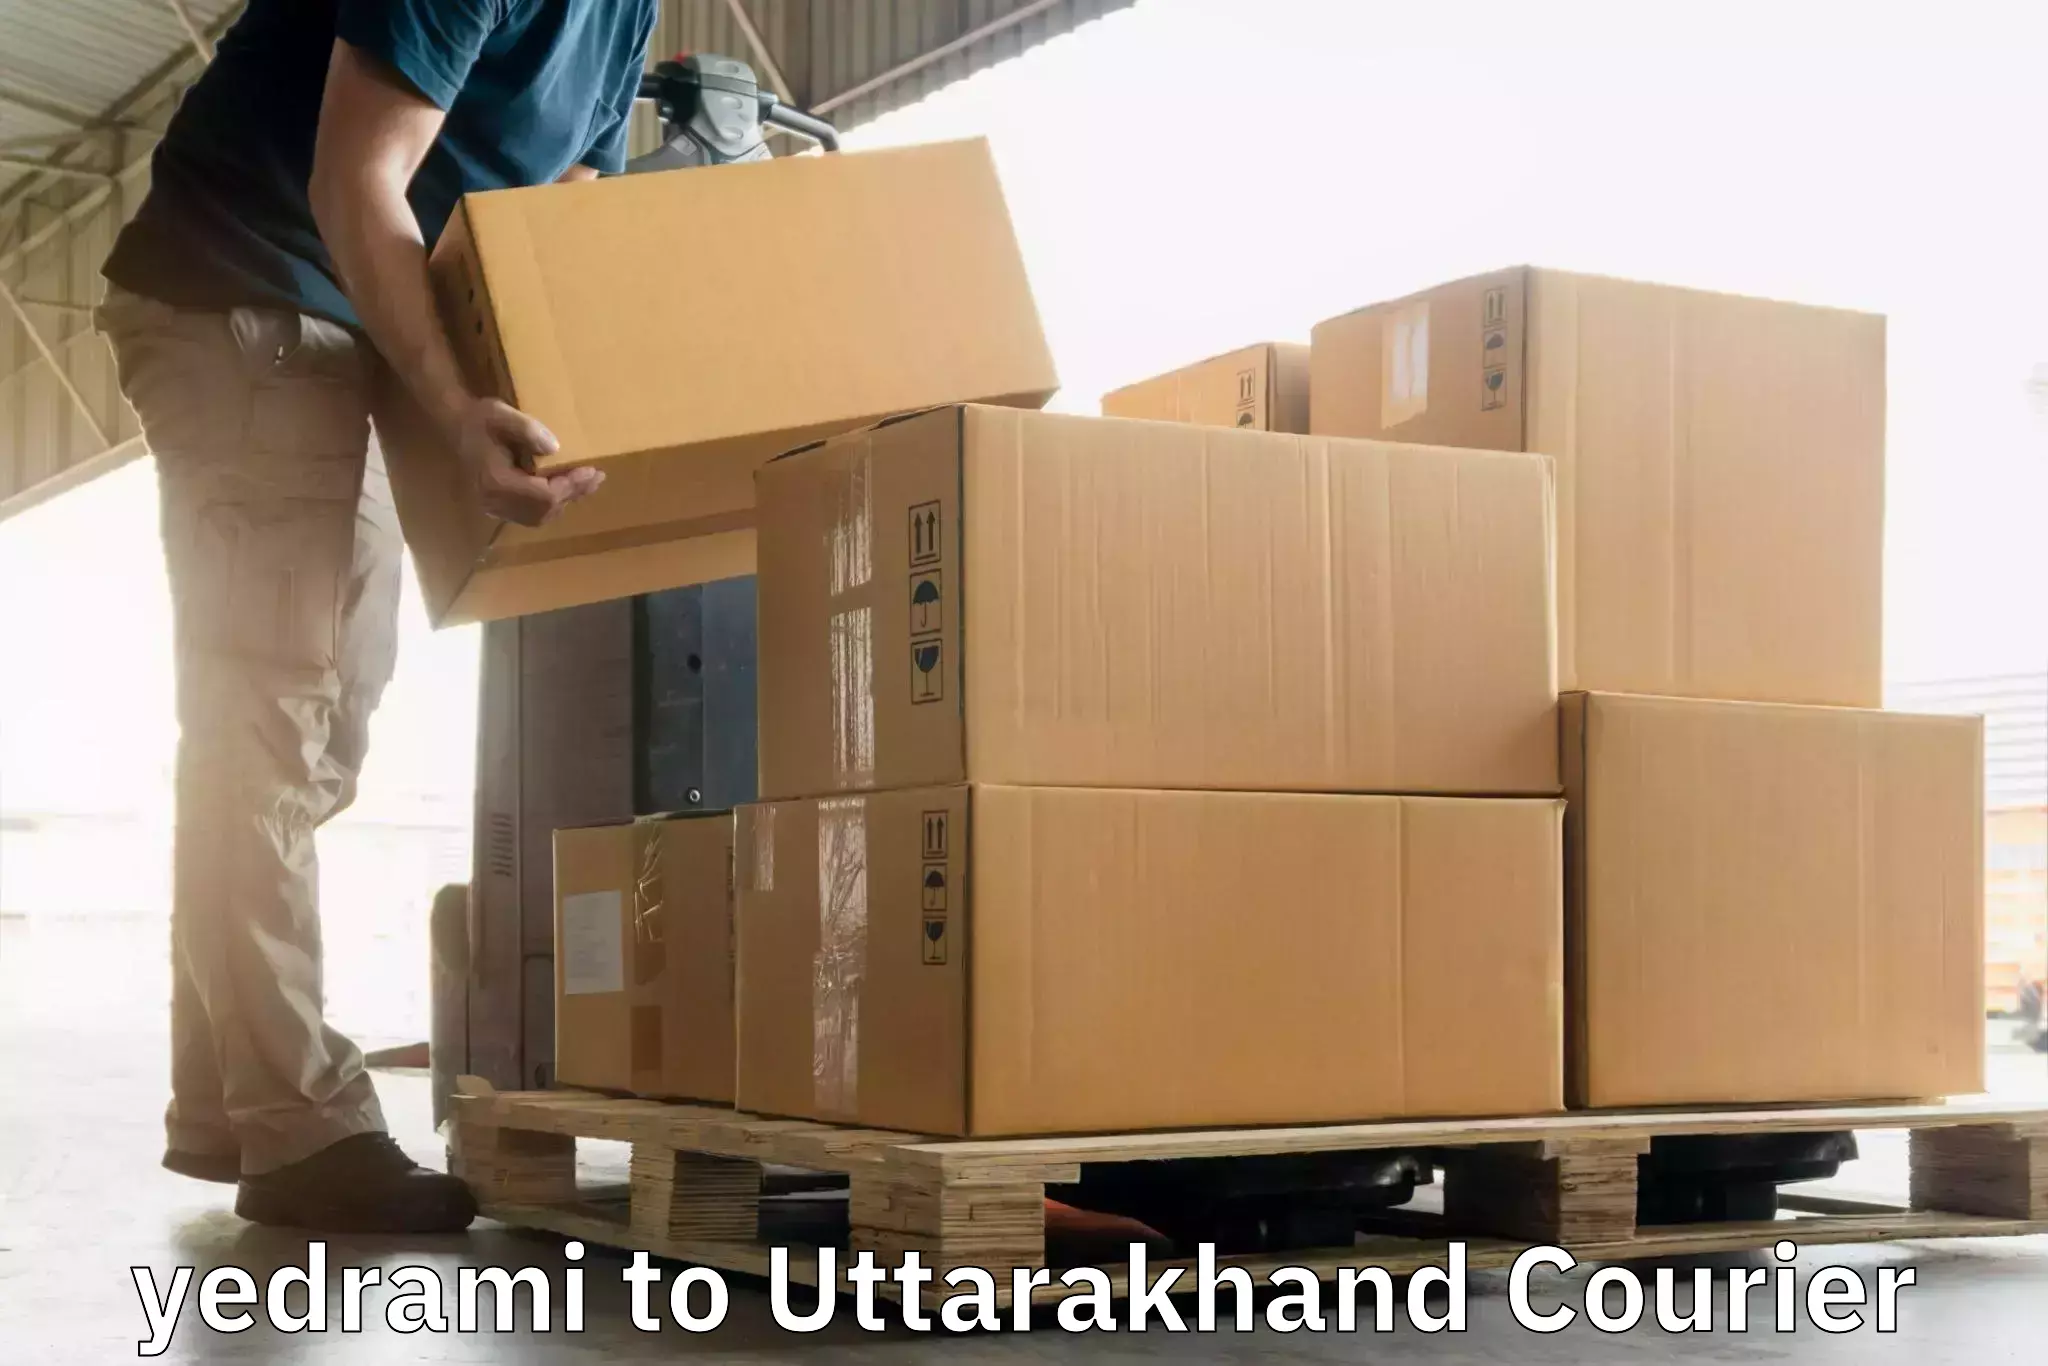 On-time delivery services yedrami to Kashipur